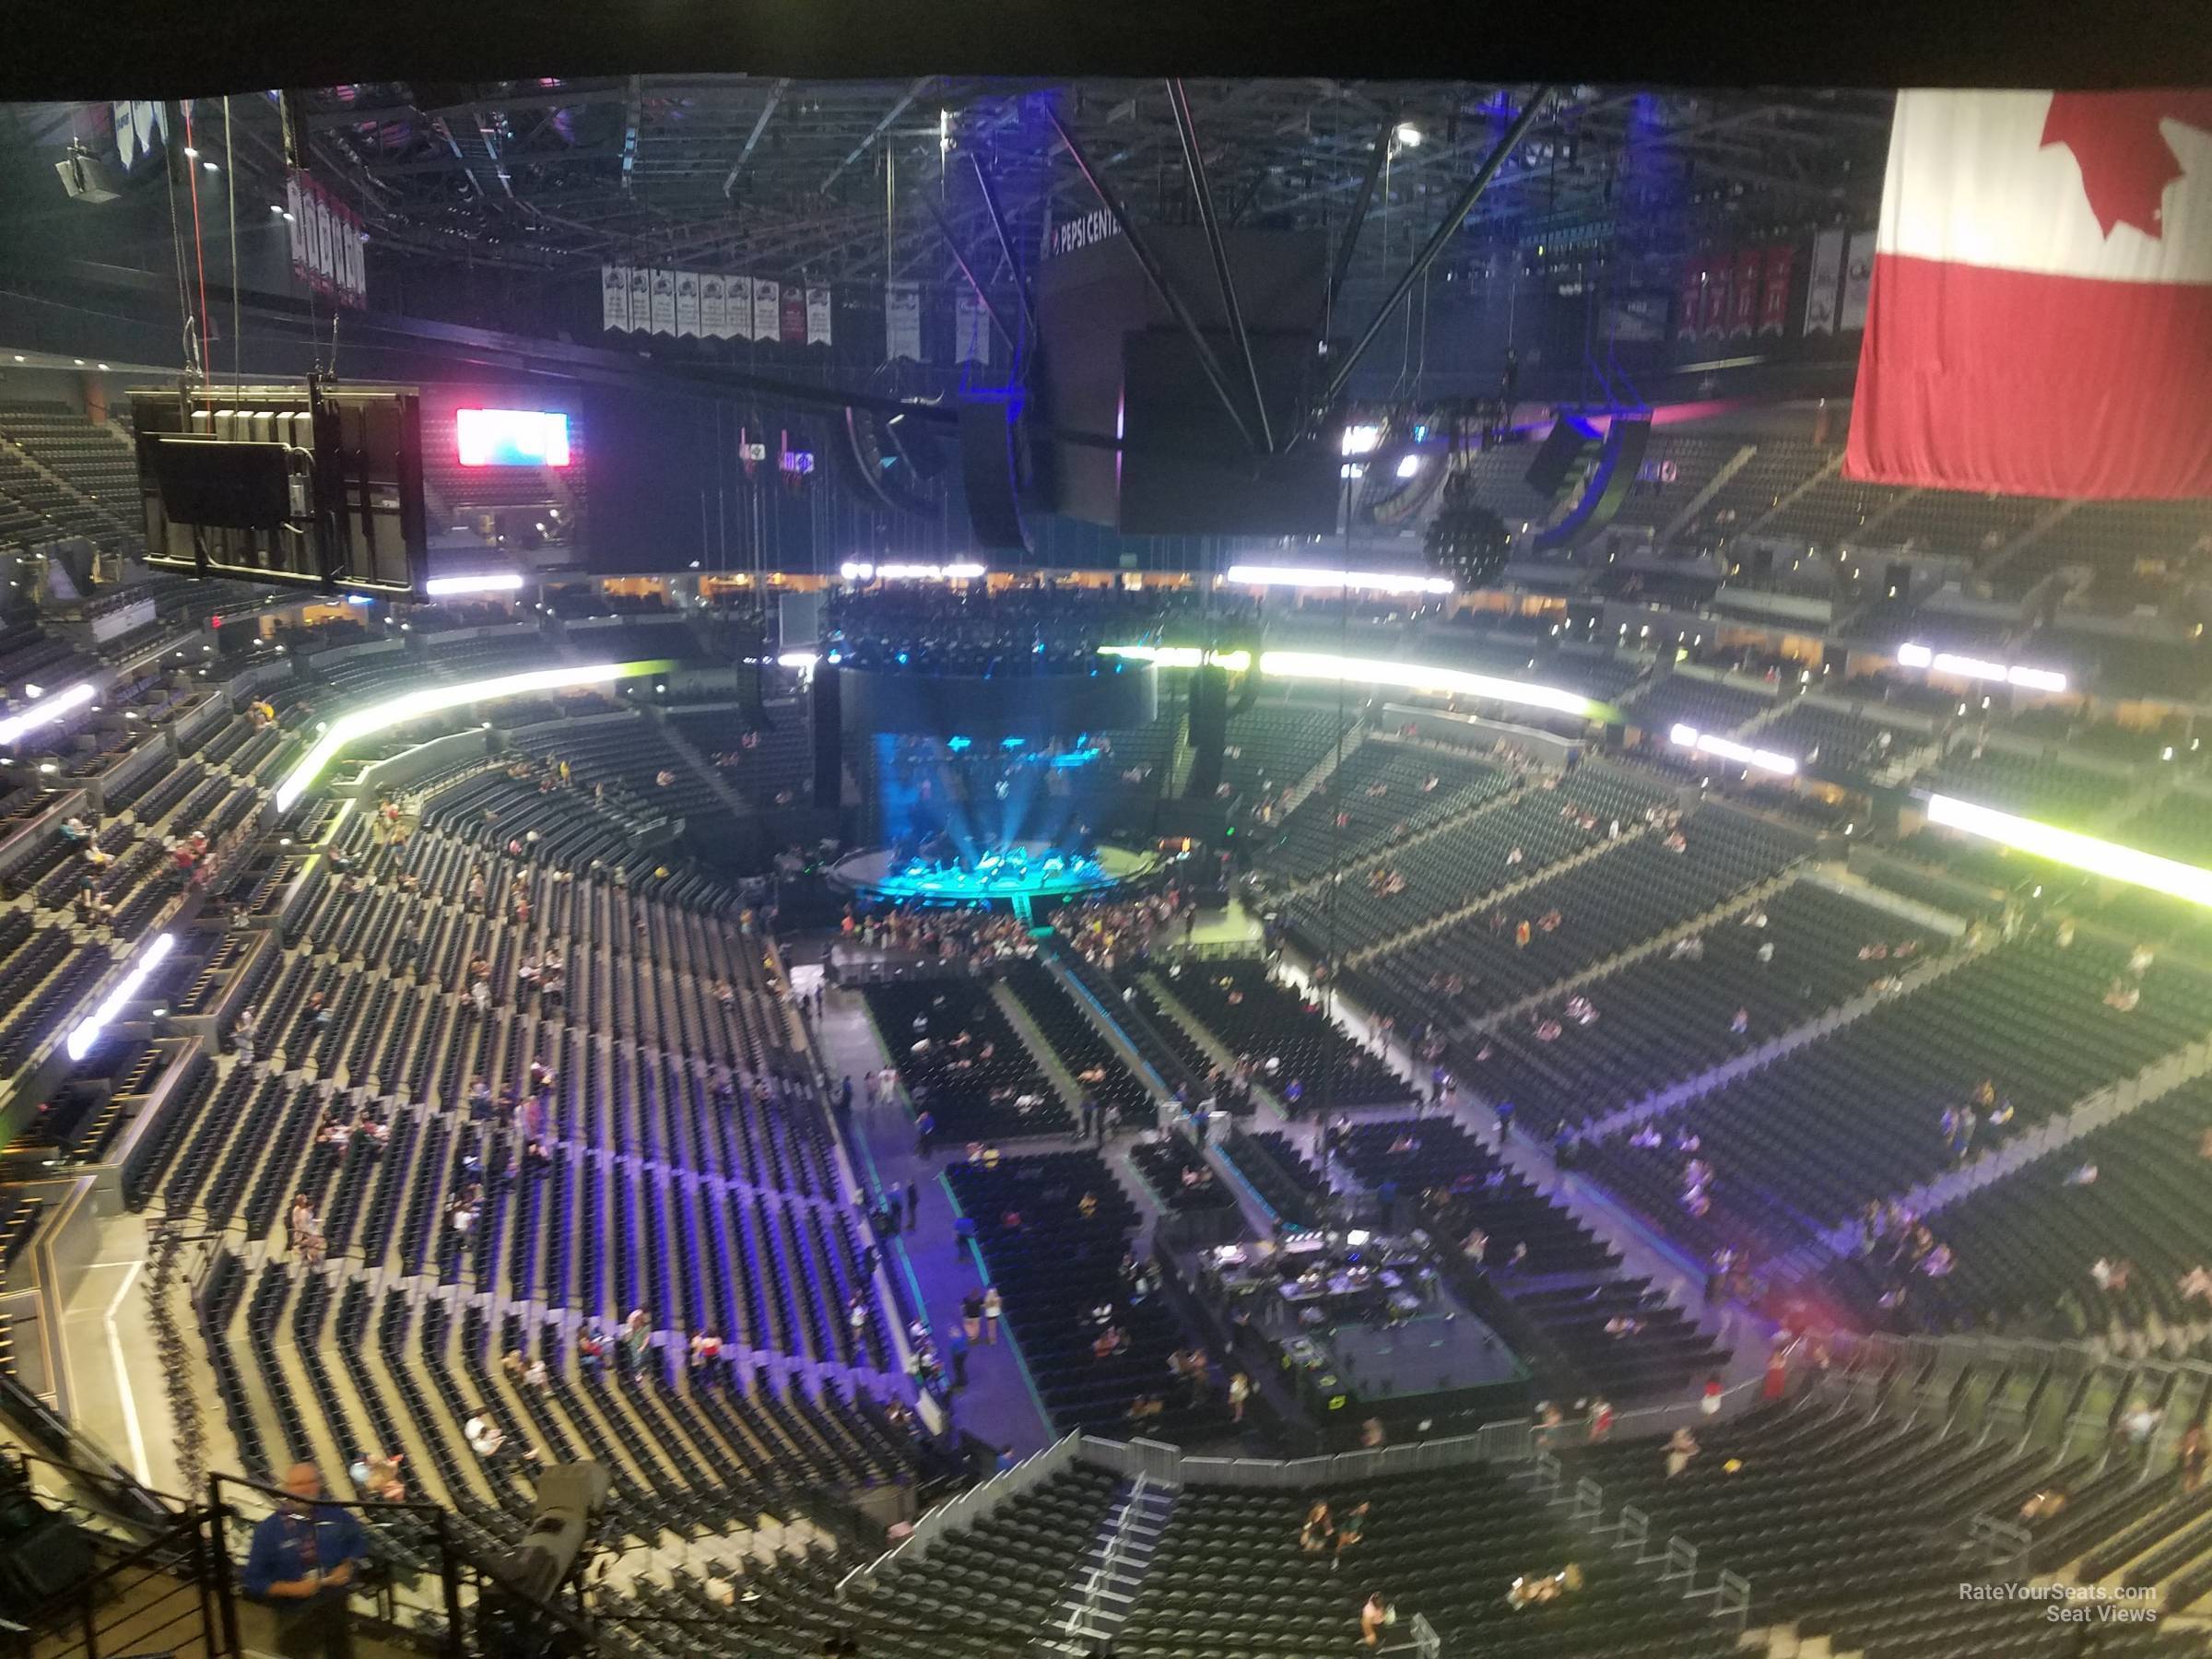 section 326, row 13 seat view  for concert - ball arena